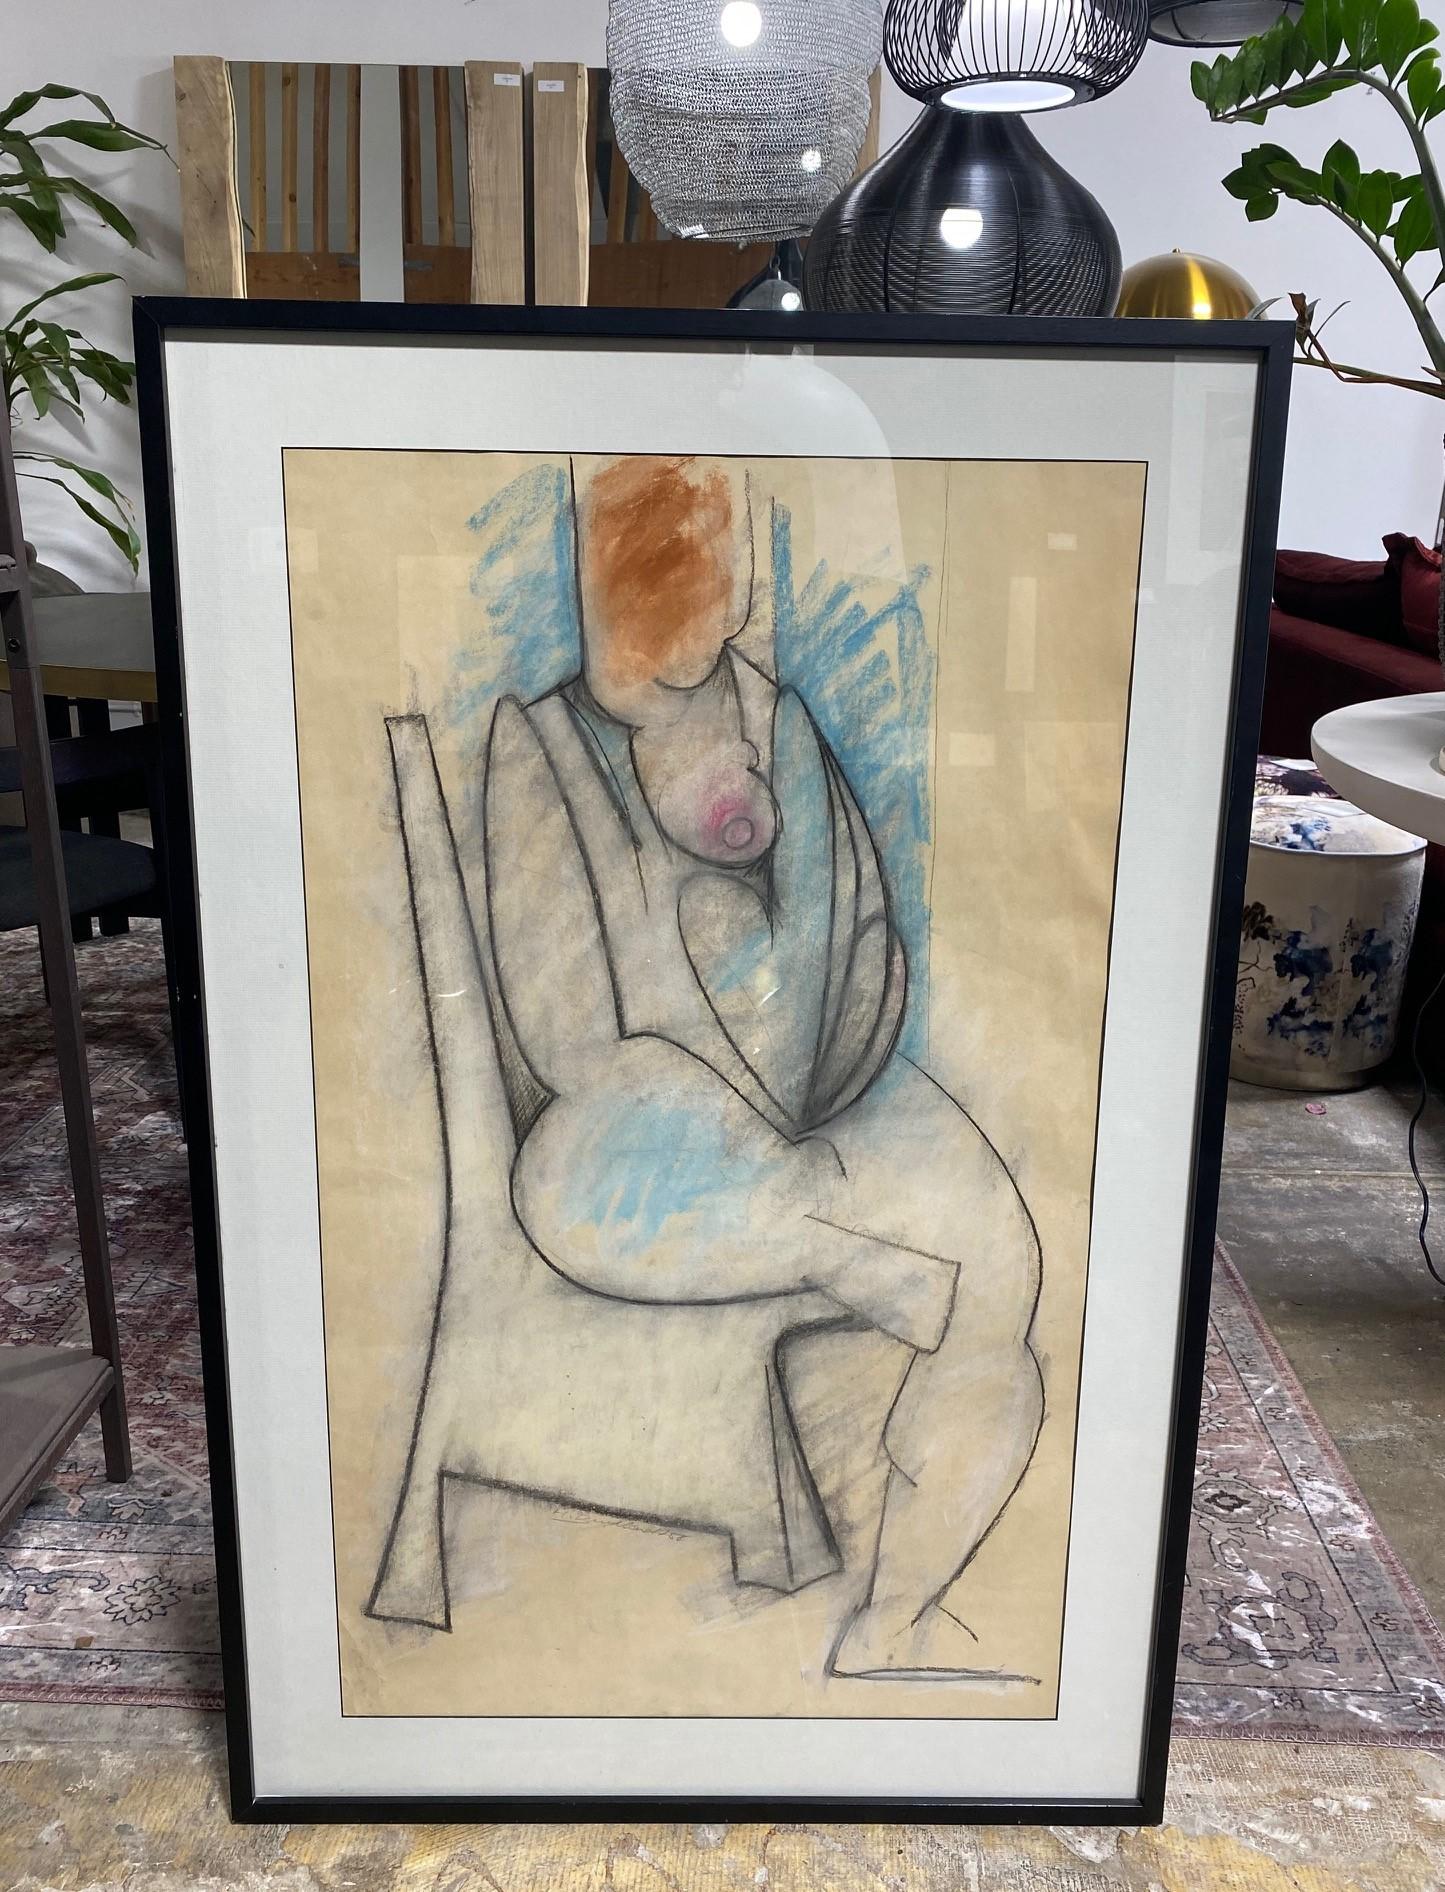 A wonderful, highly engaging large original abstract female nude pastel painting/drawing by Swiss/ American/ Californian painter-artist Hans Burkhardt. 

This work, titled 